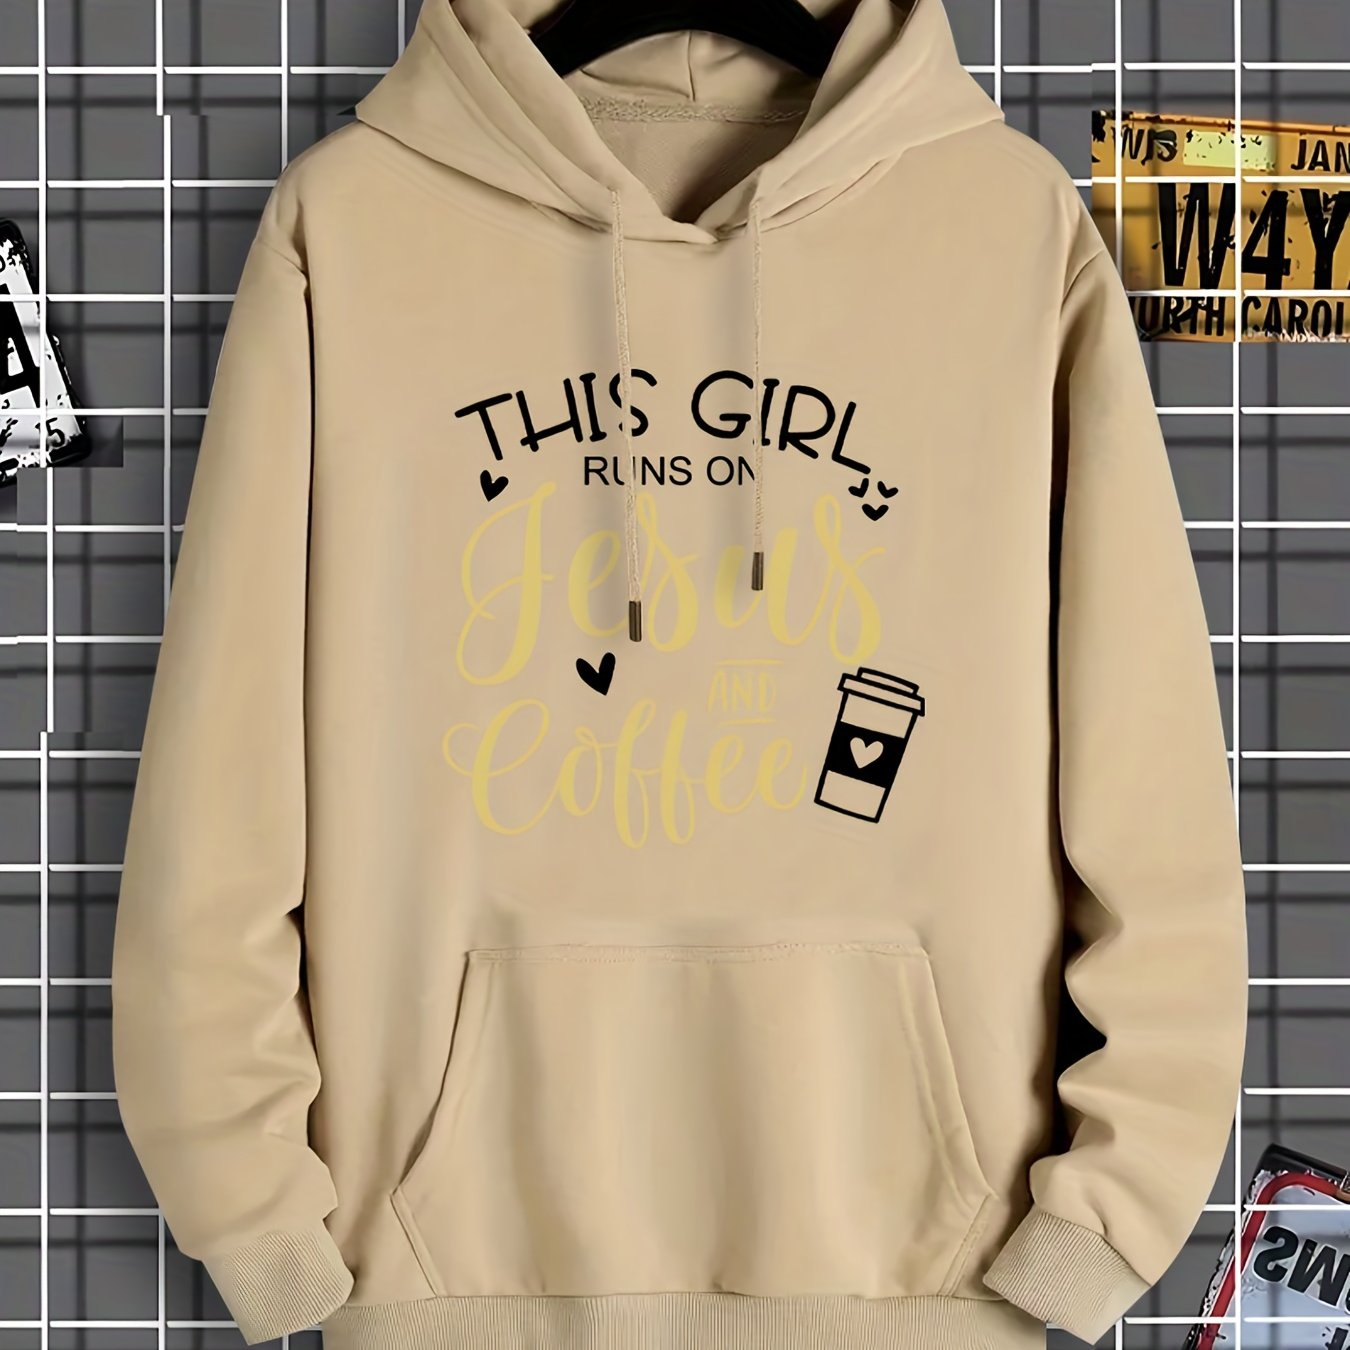 This Girl Runs On Jesus And Coffee Women's Christian Pullover Hooded Sweatshirt claimedbygoddesigns